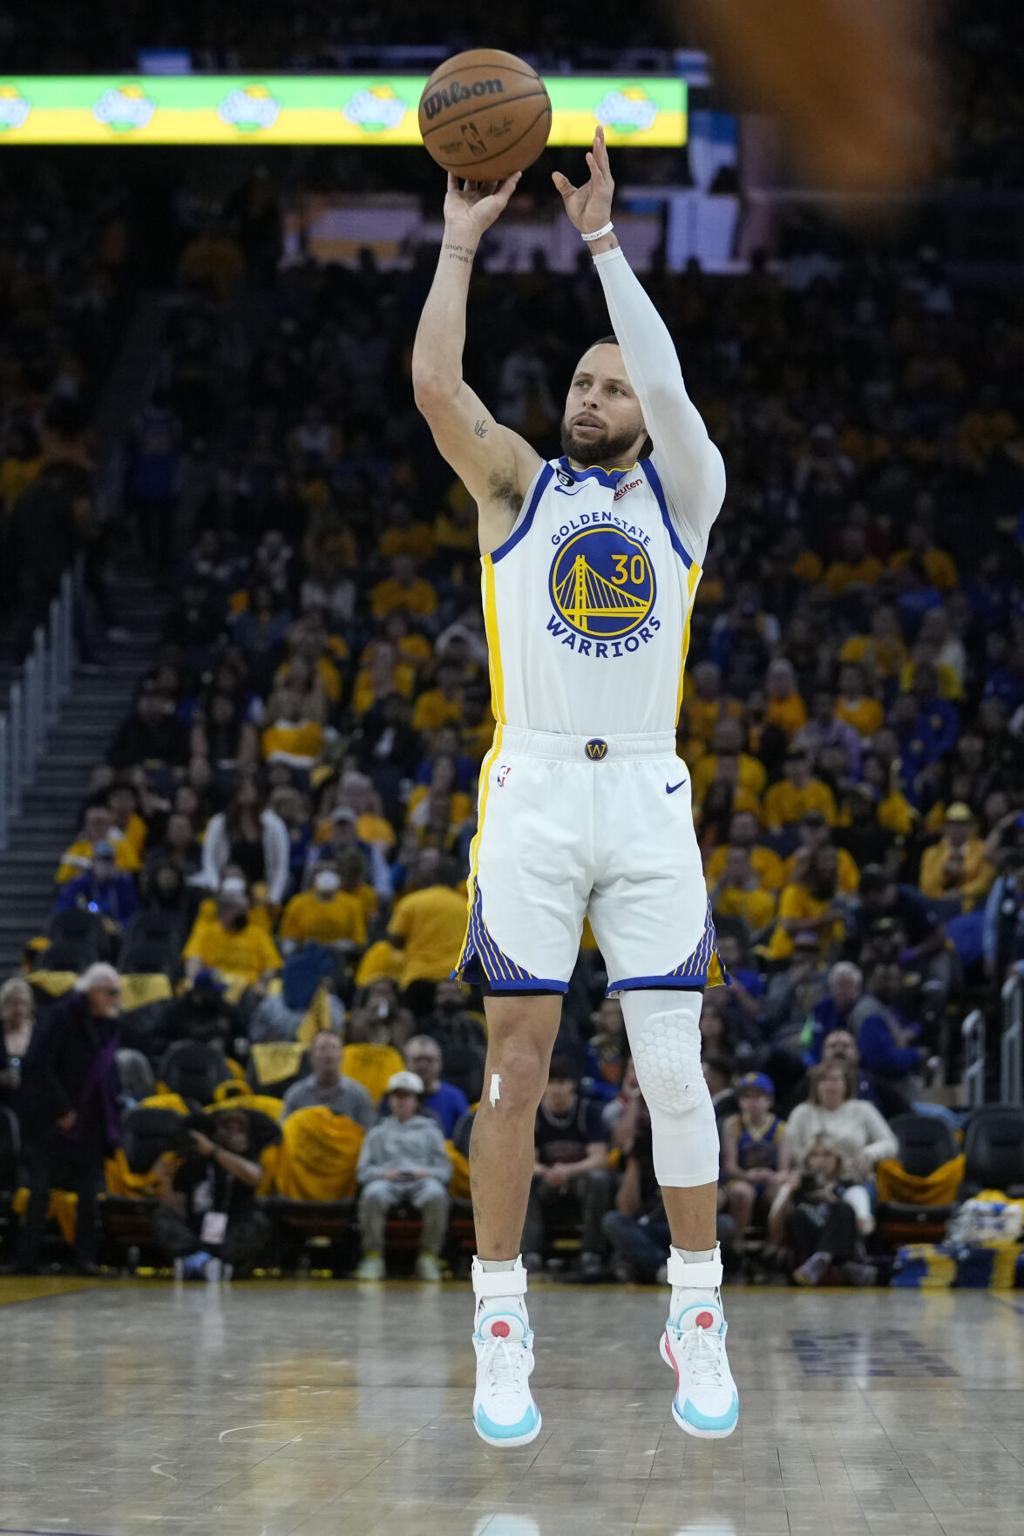 Warriors vs. Lakers score, results: Stephen Curry shines in Golden